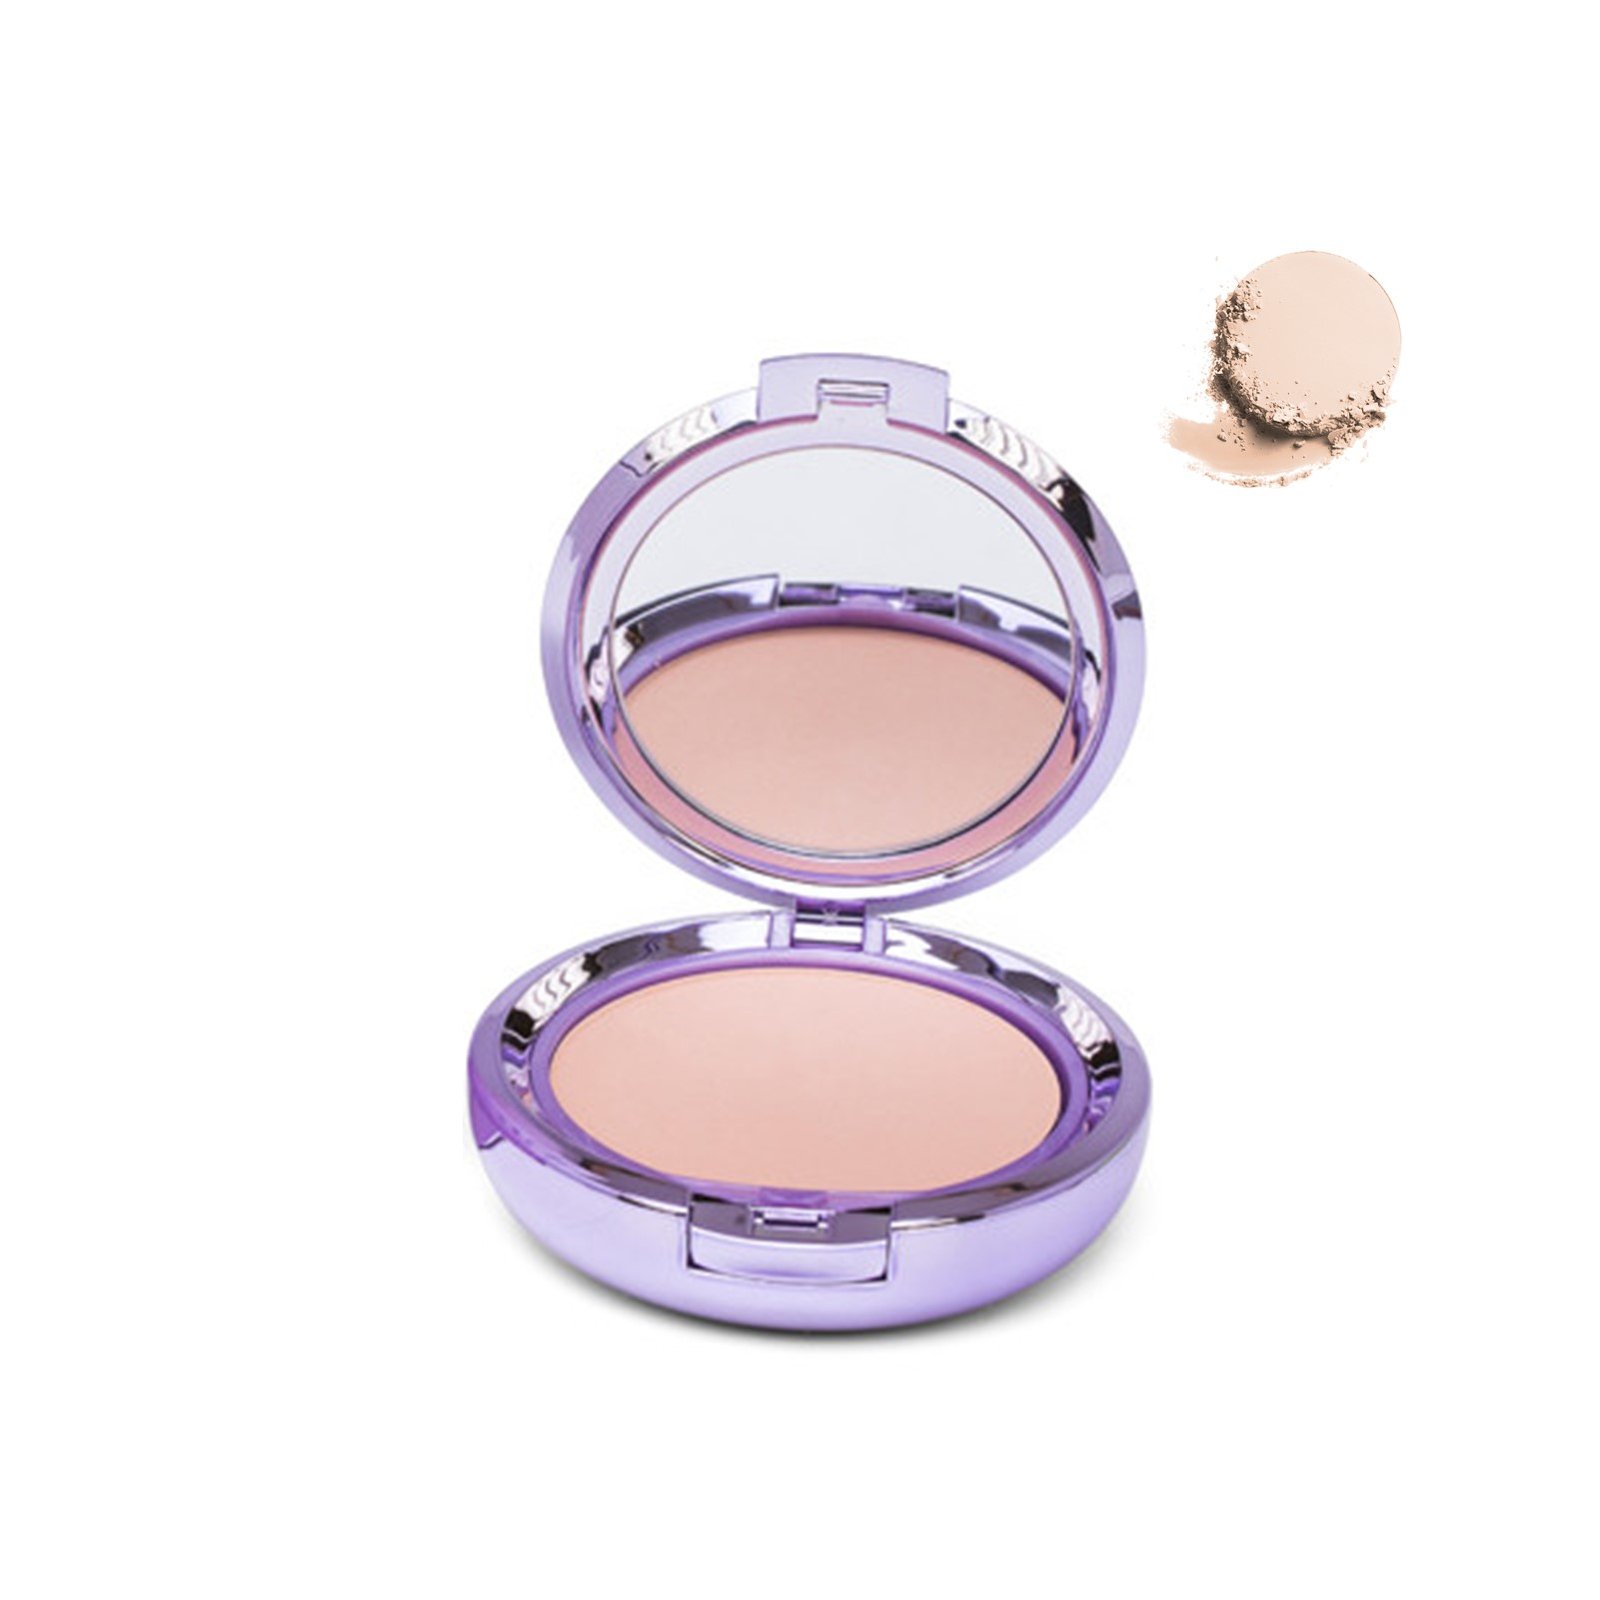 Covermark Compact Powder Oily-Acneic Skin 1 10g